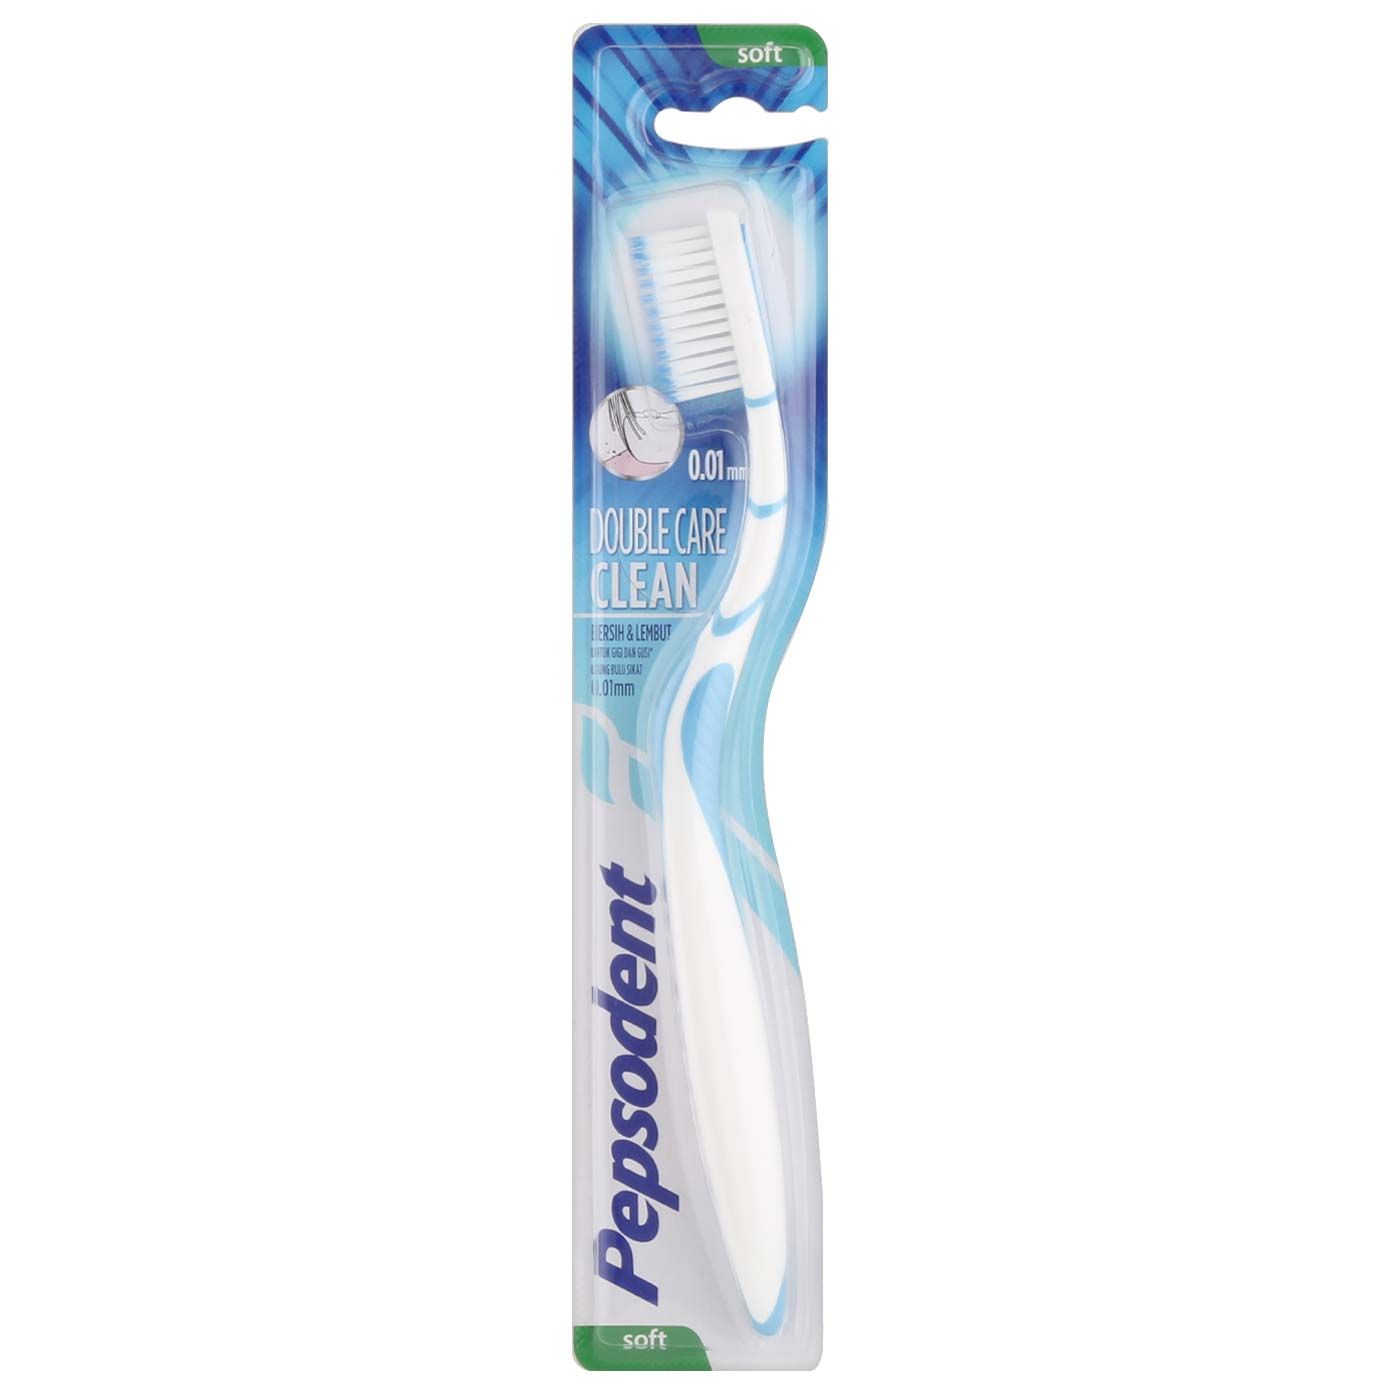 Pepsodent Tooth Brush Dbl Care Clean Rl - 1